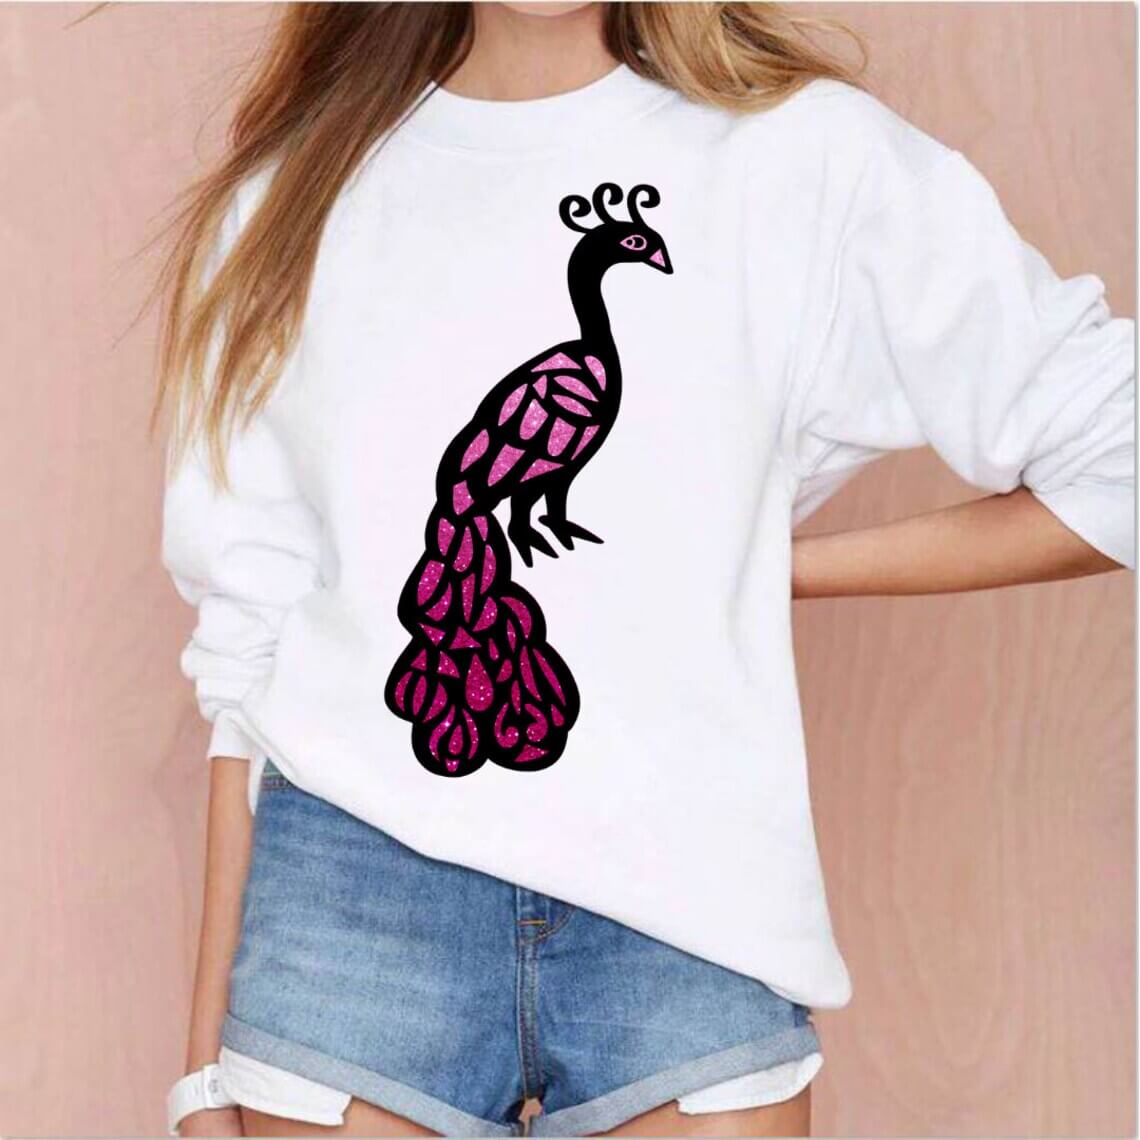 Woman wearing a white sweater with a pink and black bird on it.